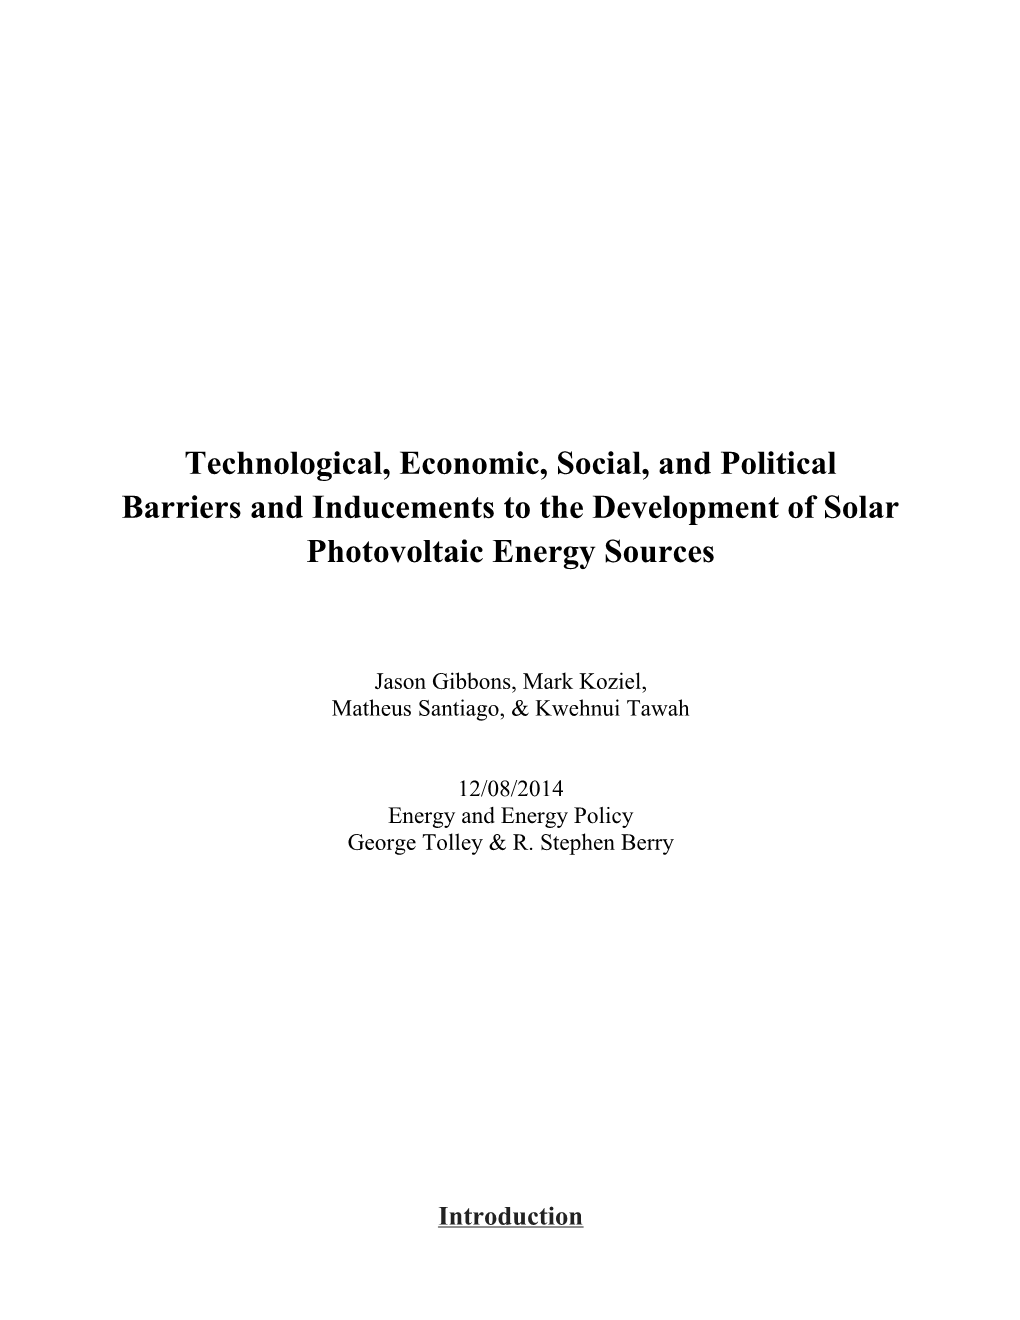 Technological, Economic, Social, and Political Barriers and Inducements to the Development